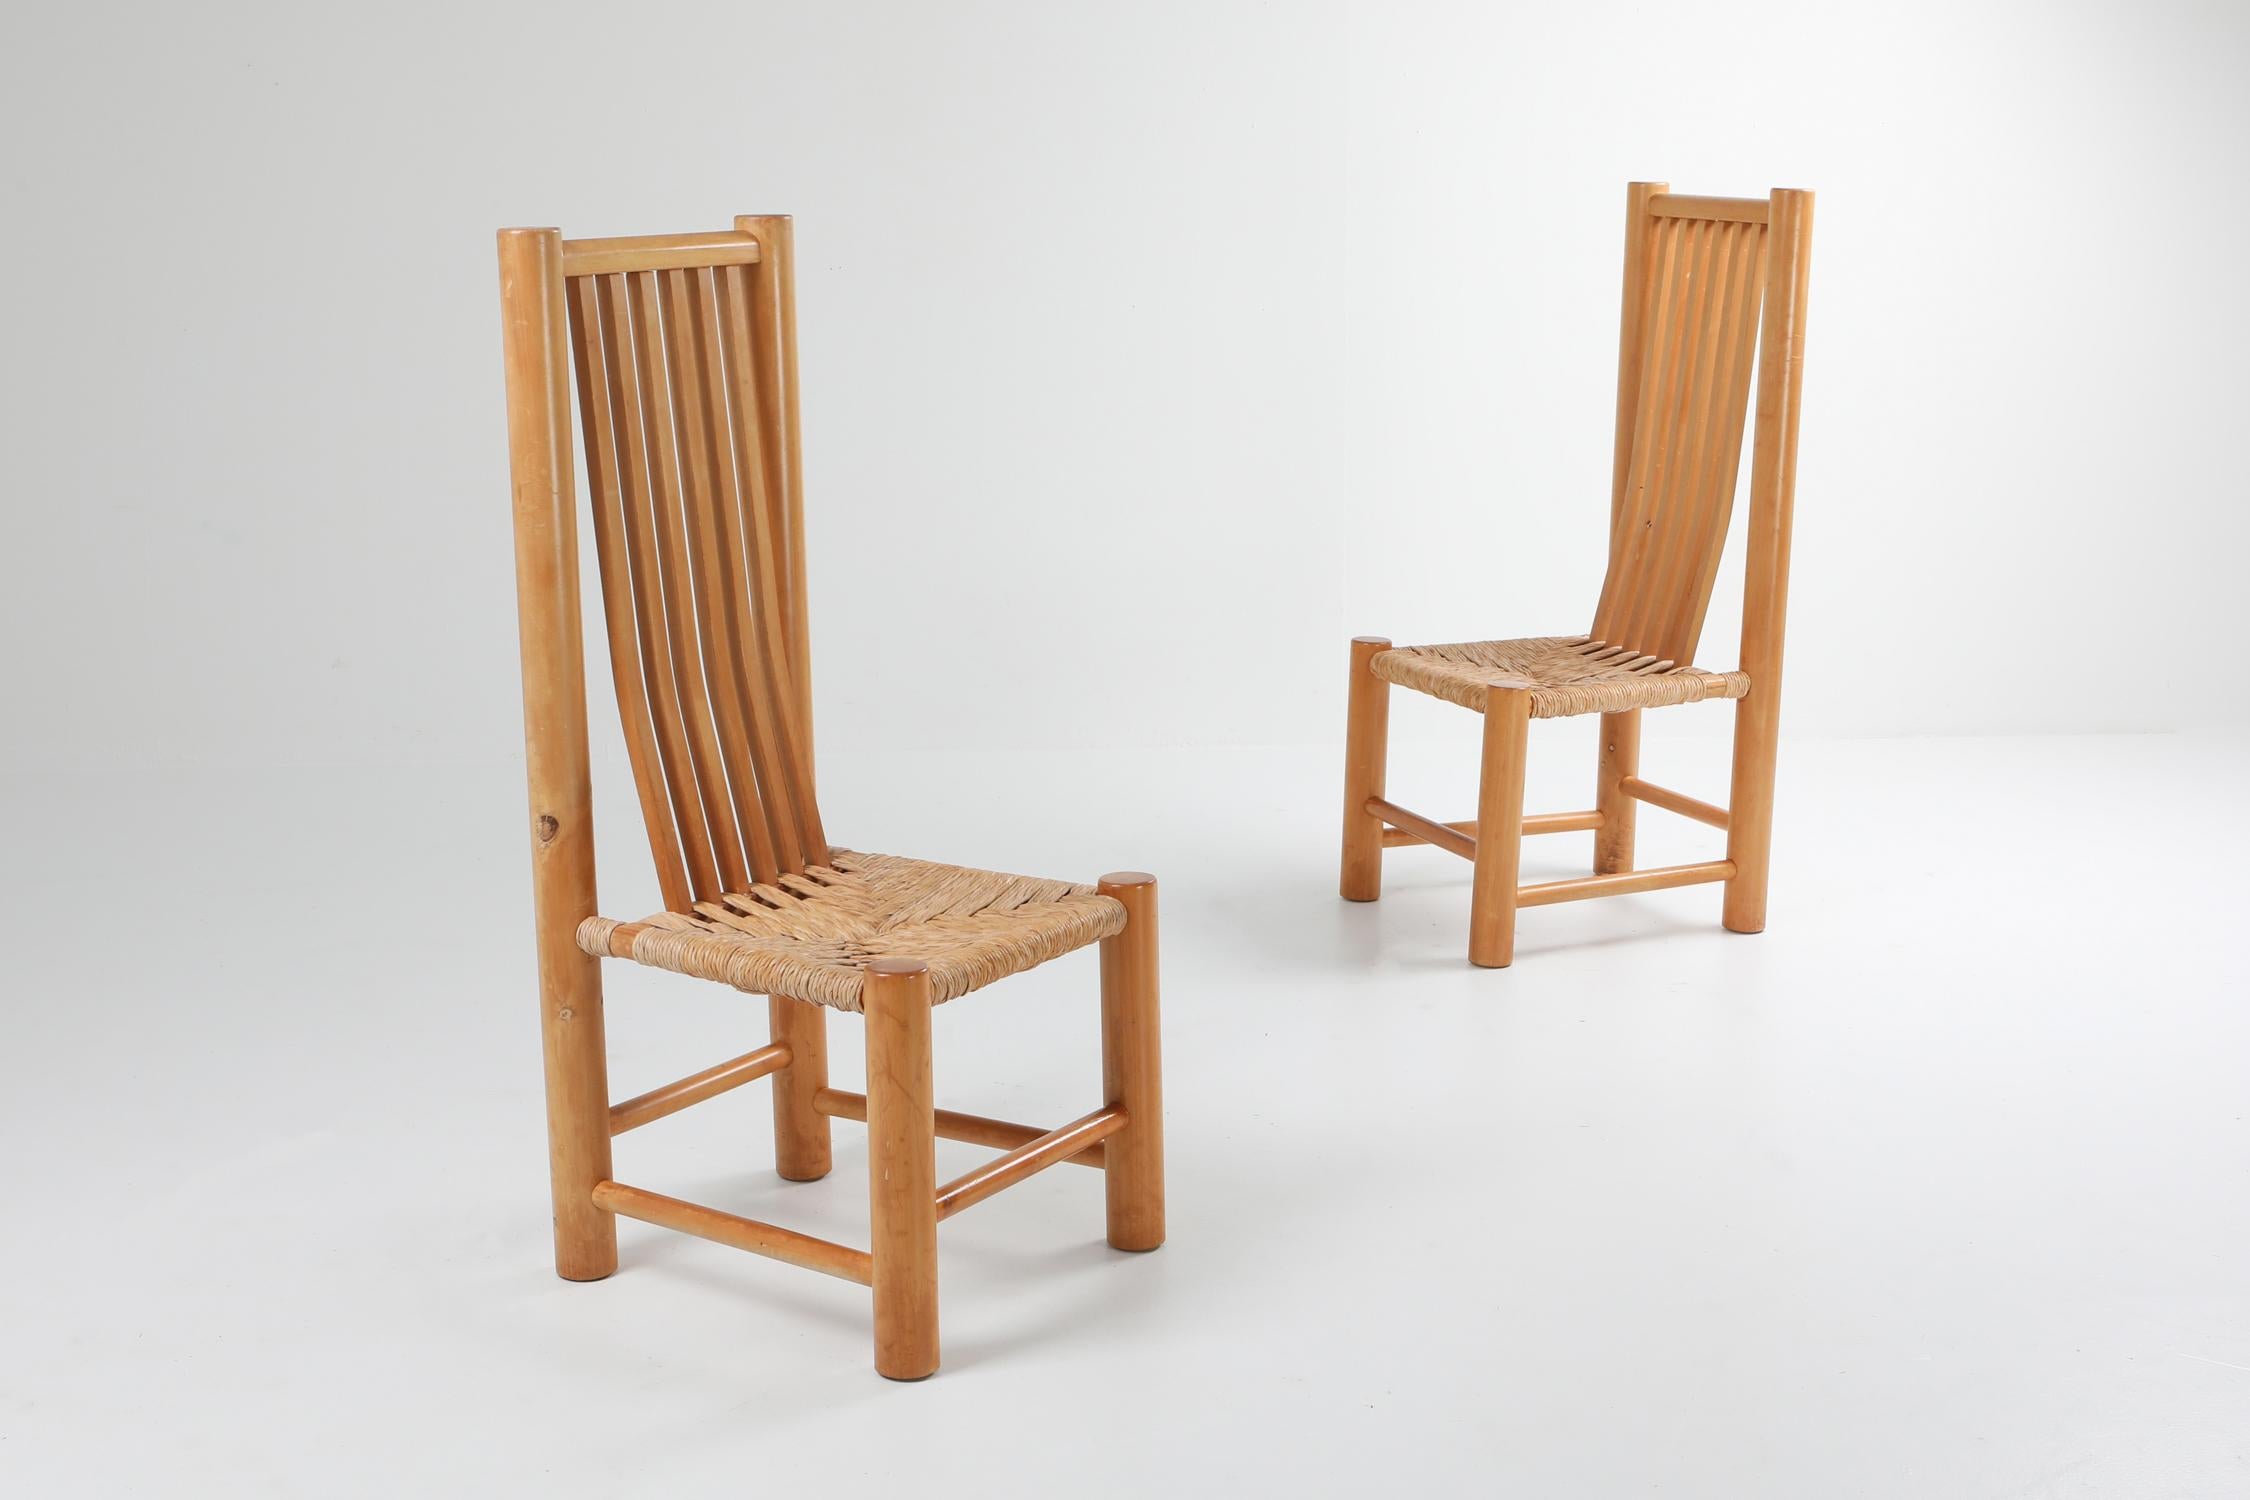 Pierre Chapo style, Mid-Century Modern high back chairs, French elm, France, 1960s.
Naturalist set of eight dining chairs with a woven cord seating.
Also from the same original house we have a daybed, desk, side tables and coffee table